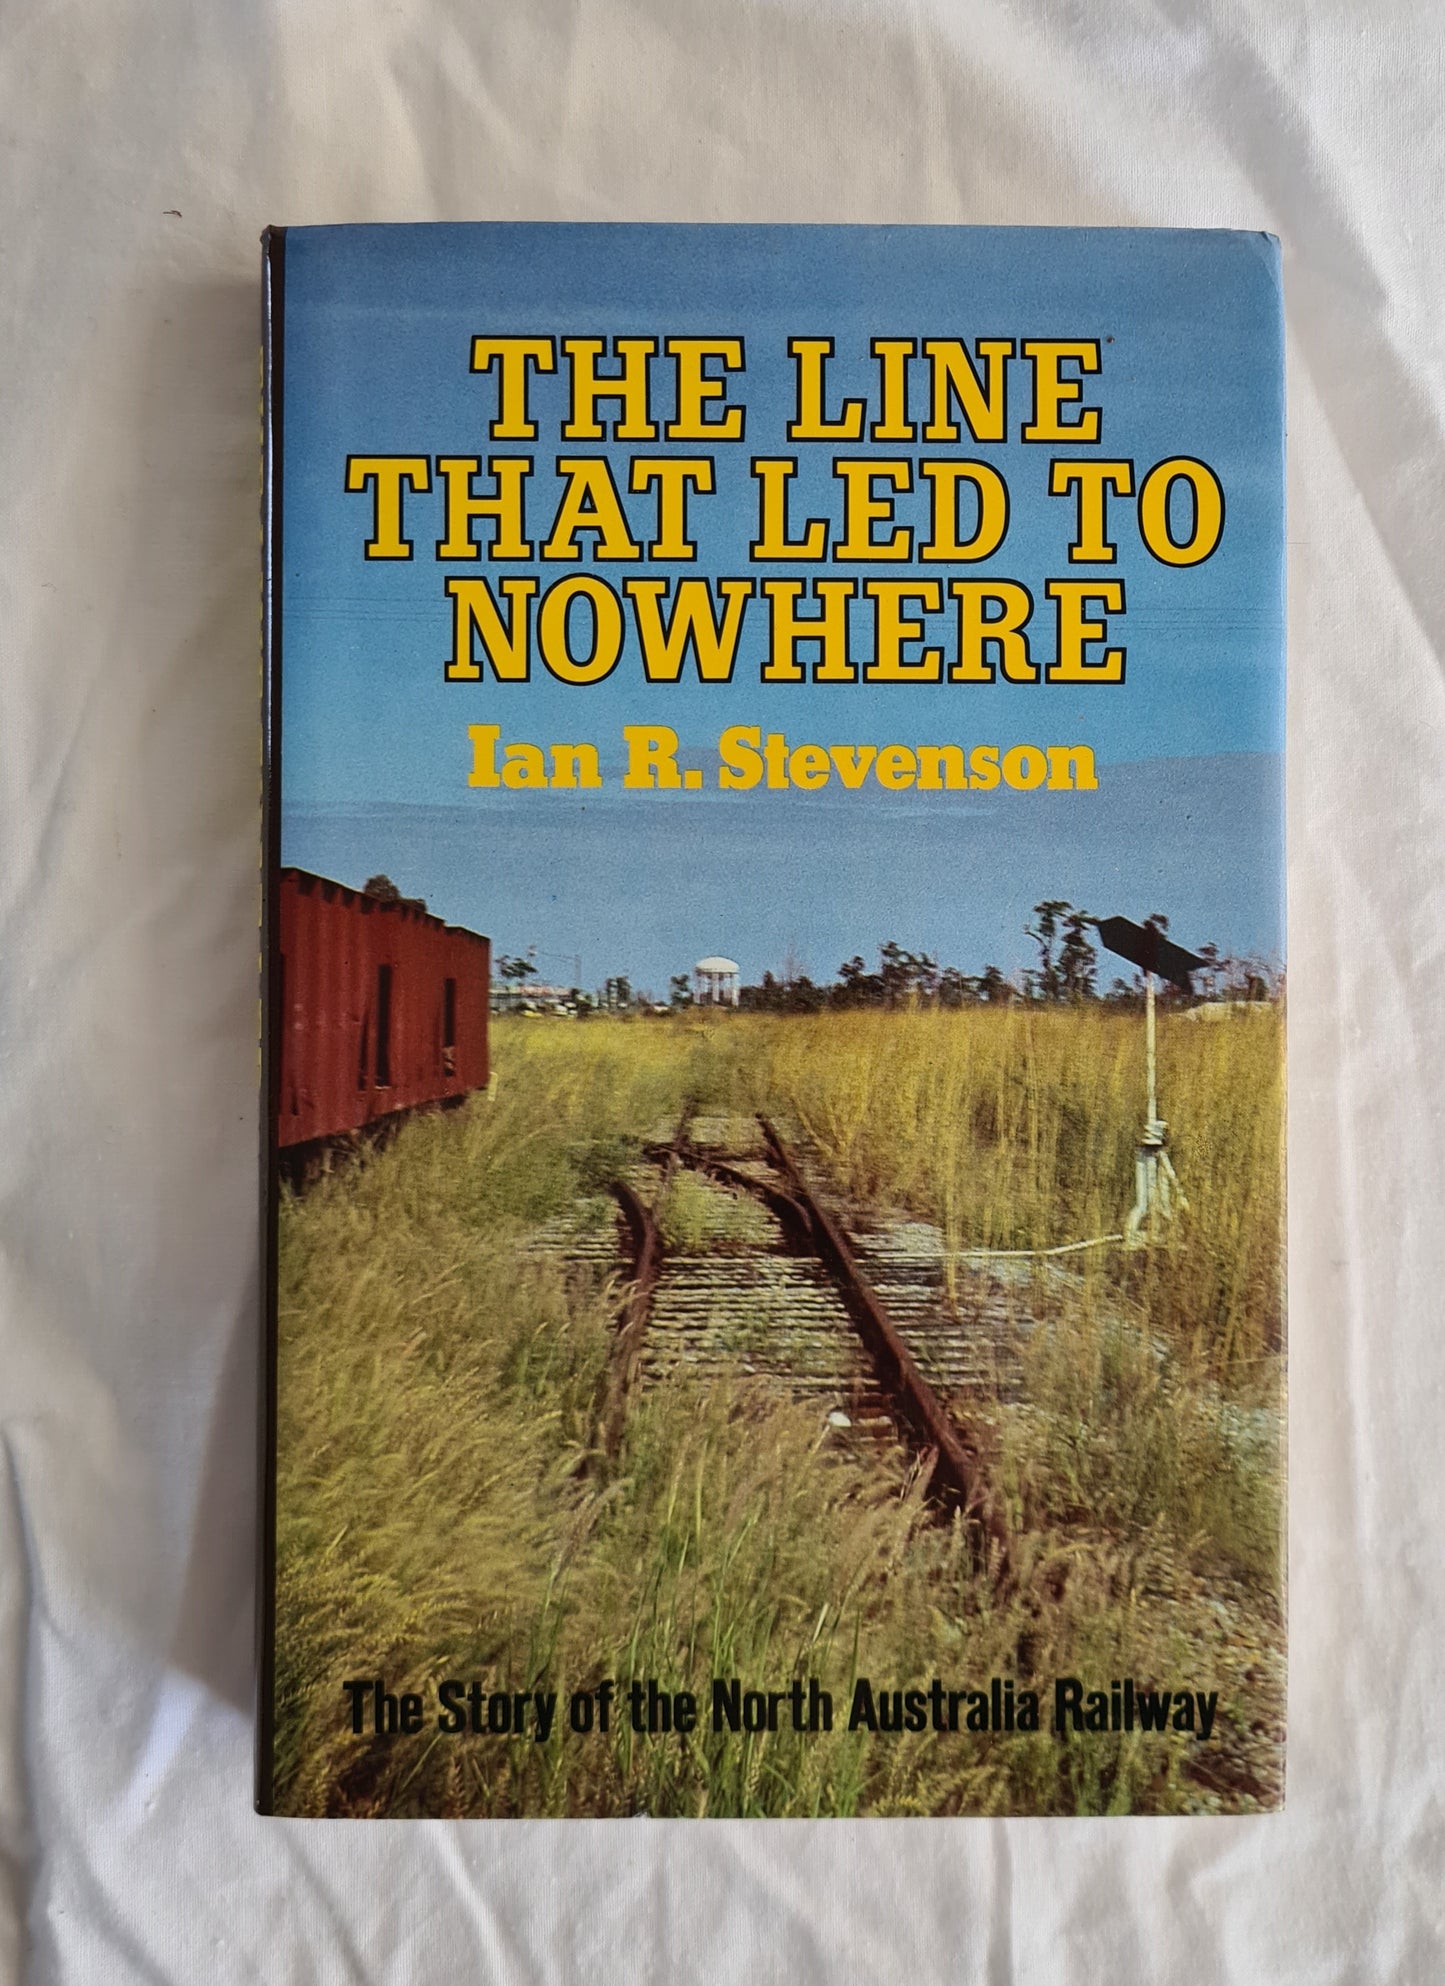 The Line That Led to Nowhere  The story of the North Australia Railway  by Ian R. Stevenson